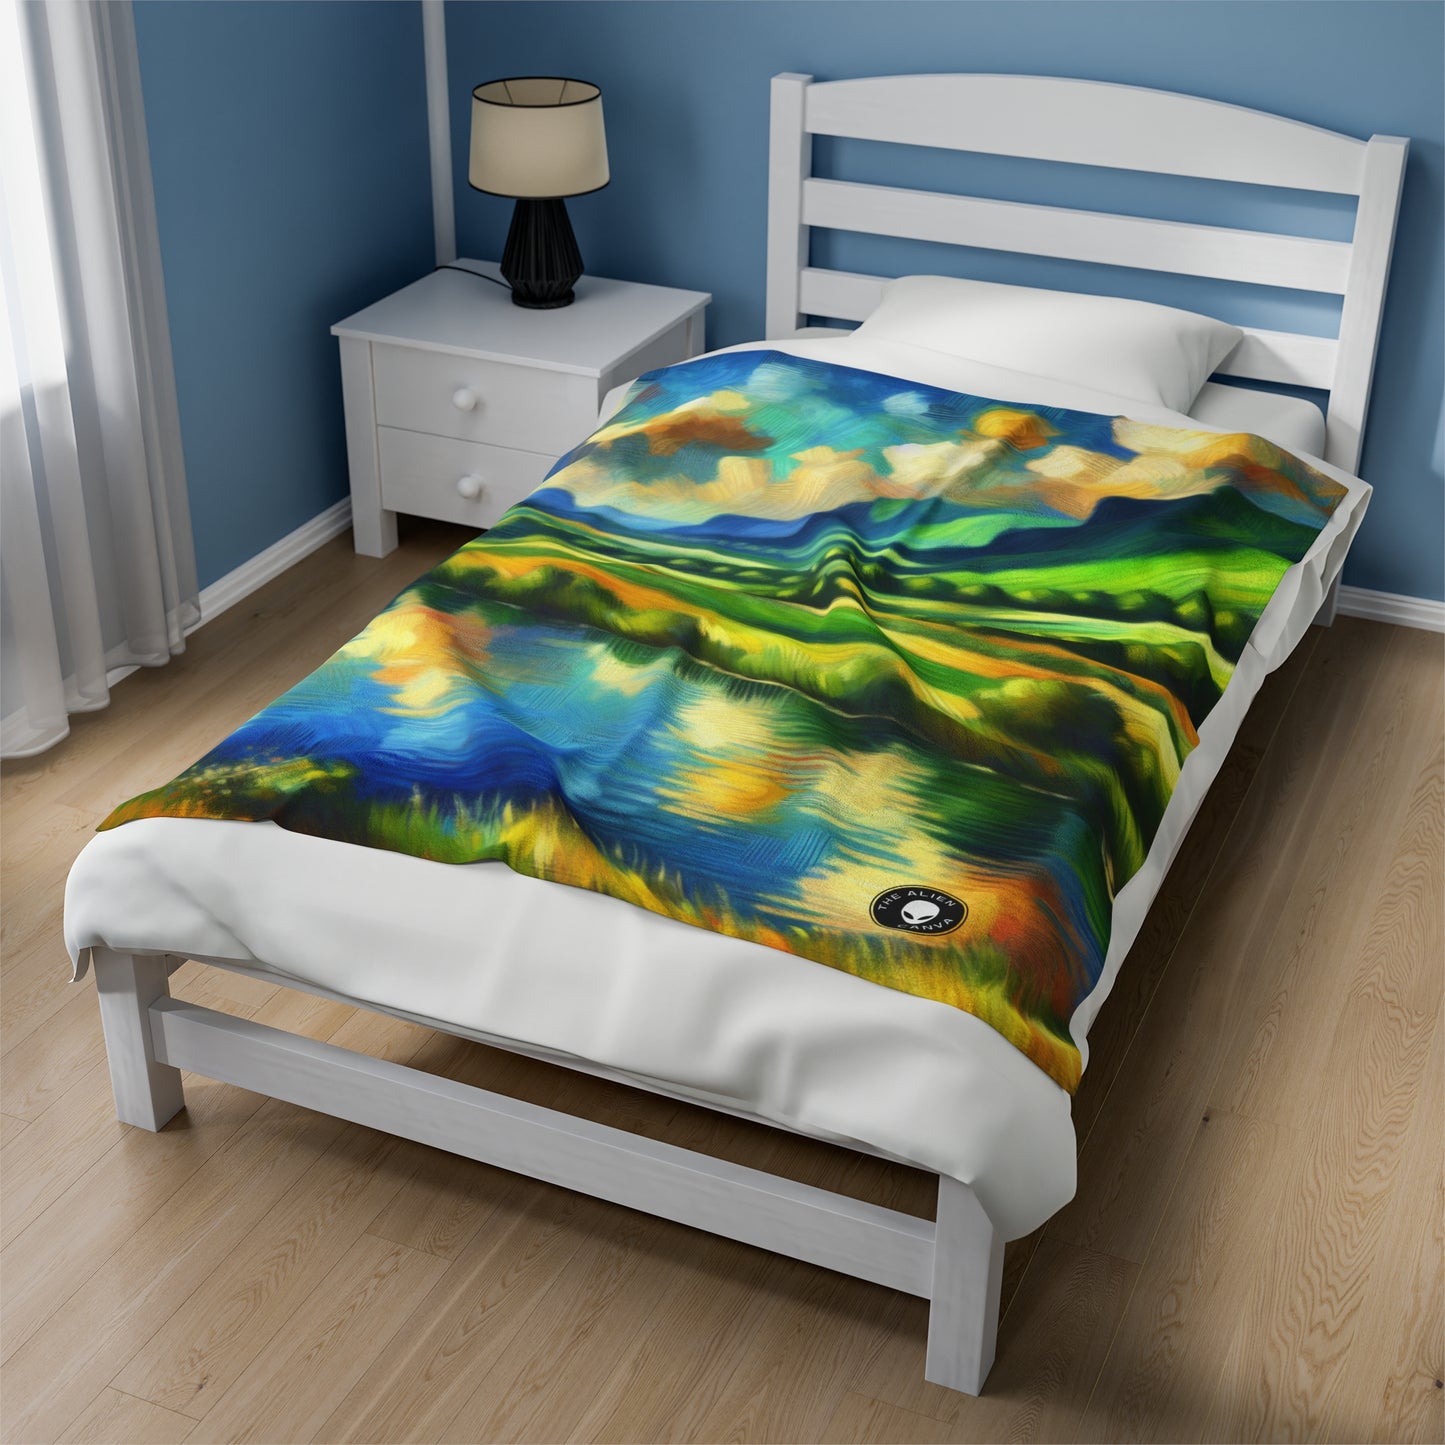 "Serenity at Sunset: An Impressionistic Meadow" - The Alien Velveteen Plush Blanket Impressionism